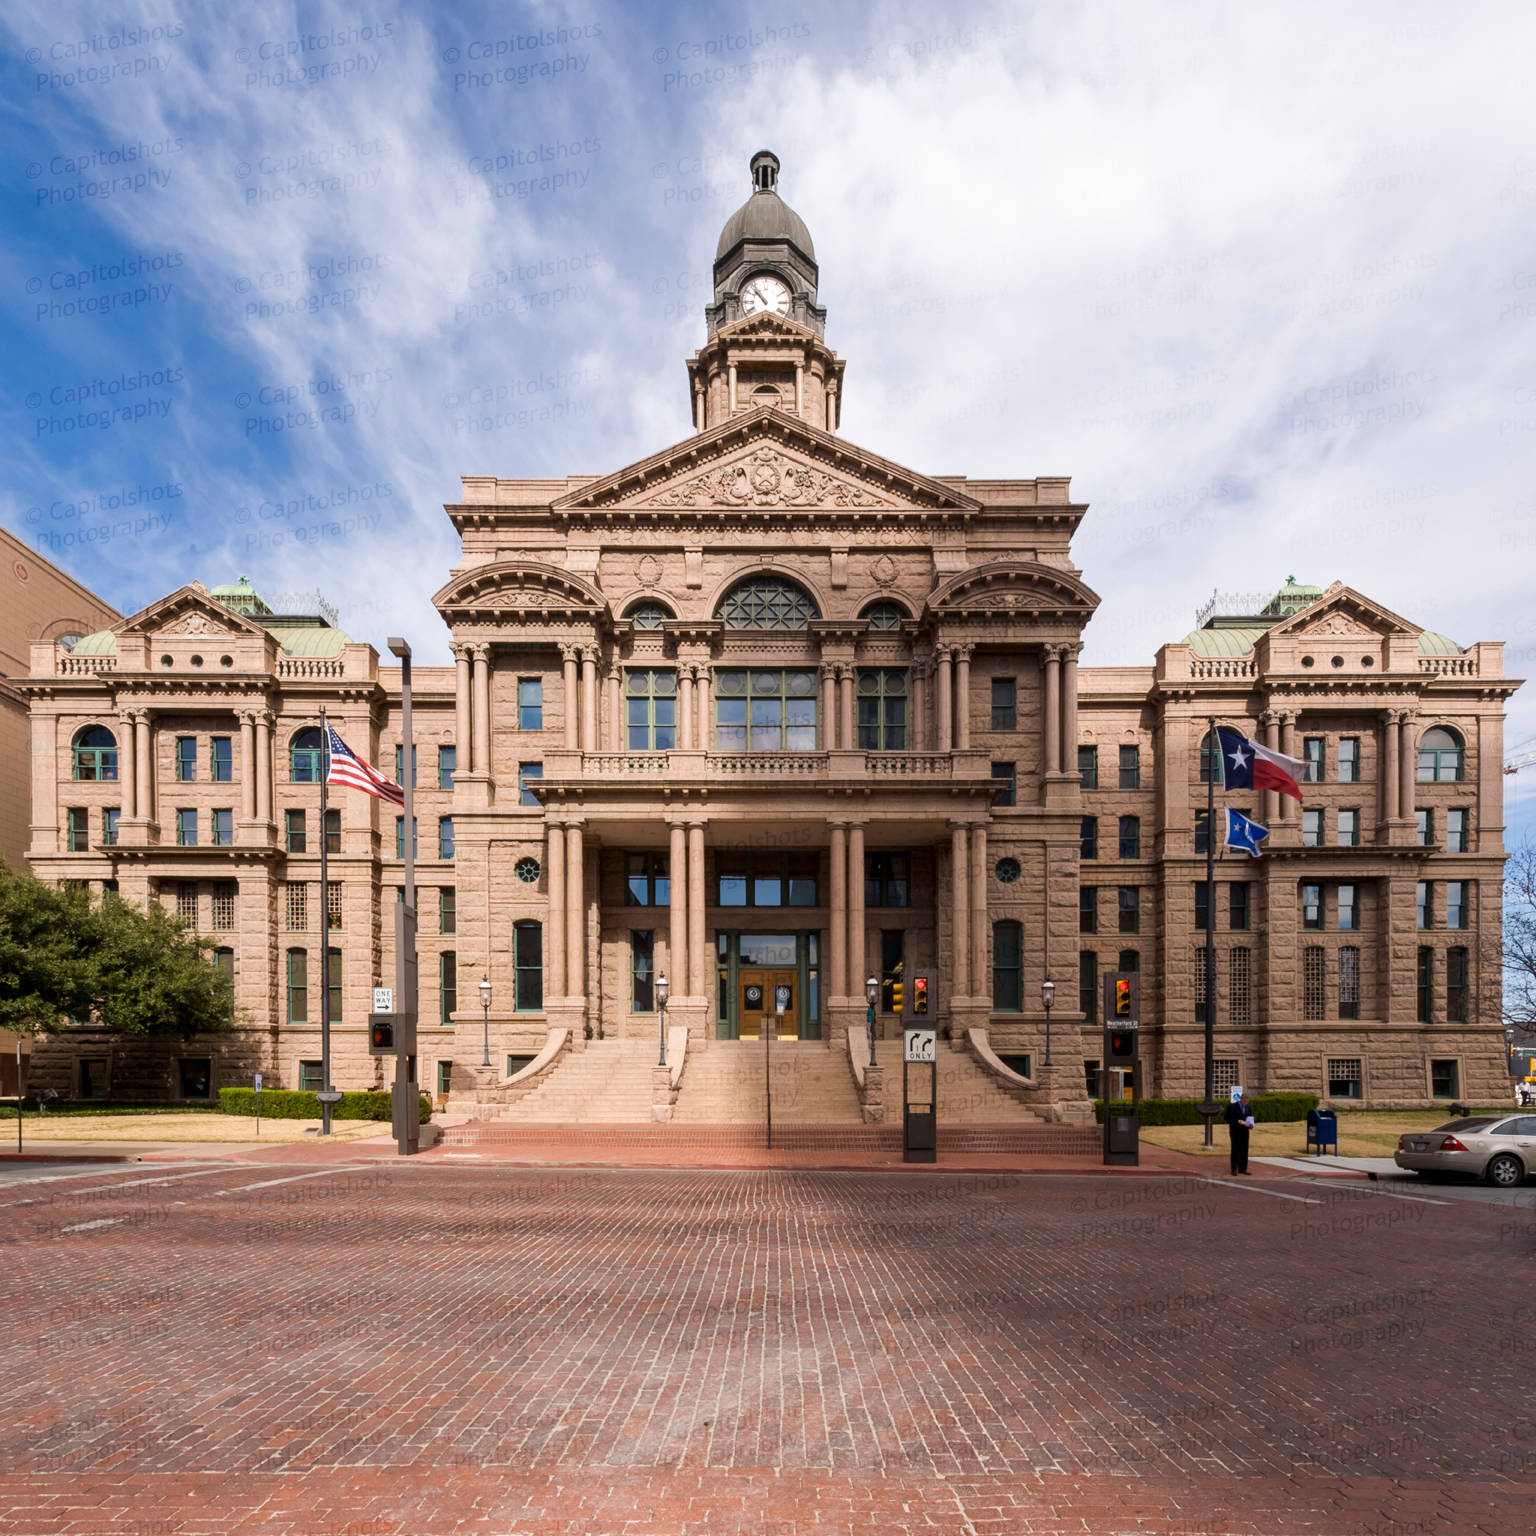 Historic Tarrant County Courthouse In Fort Worth, Texas Background